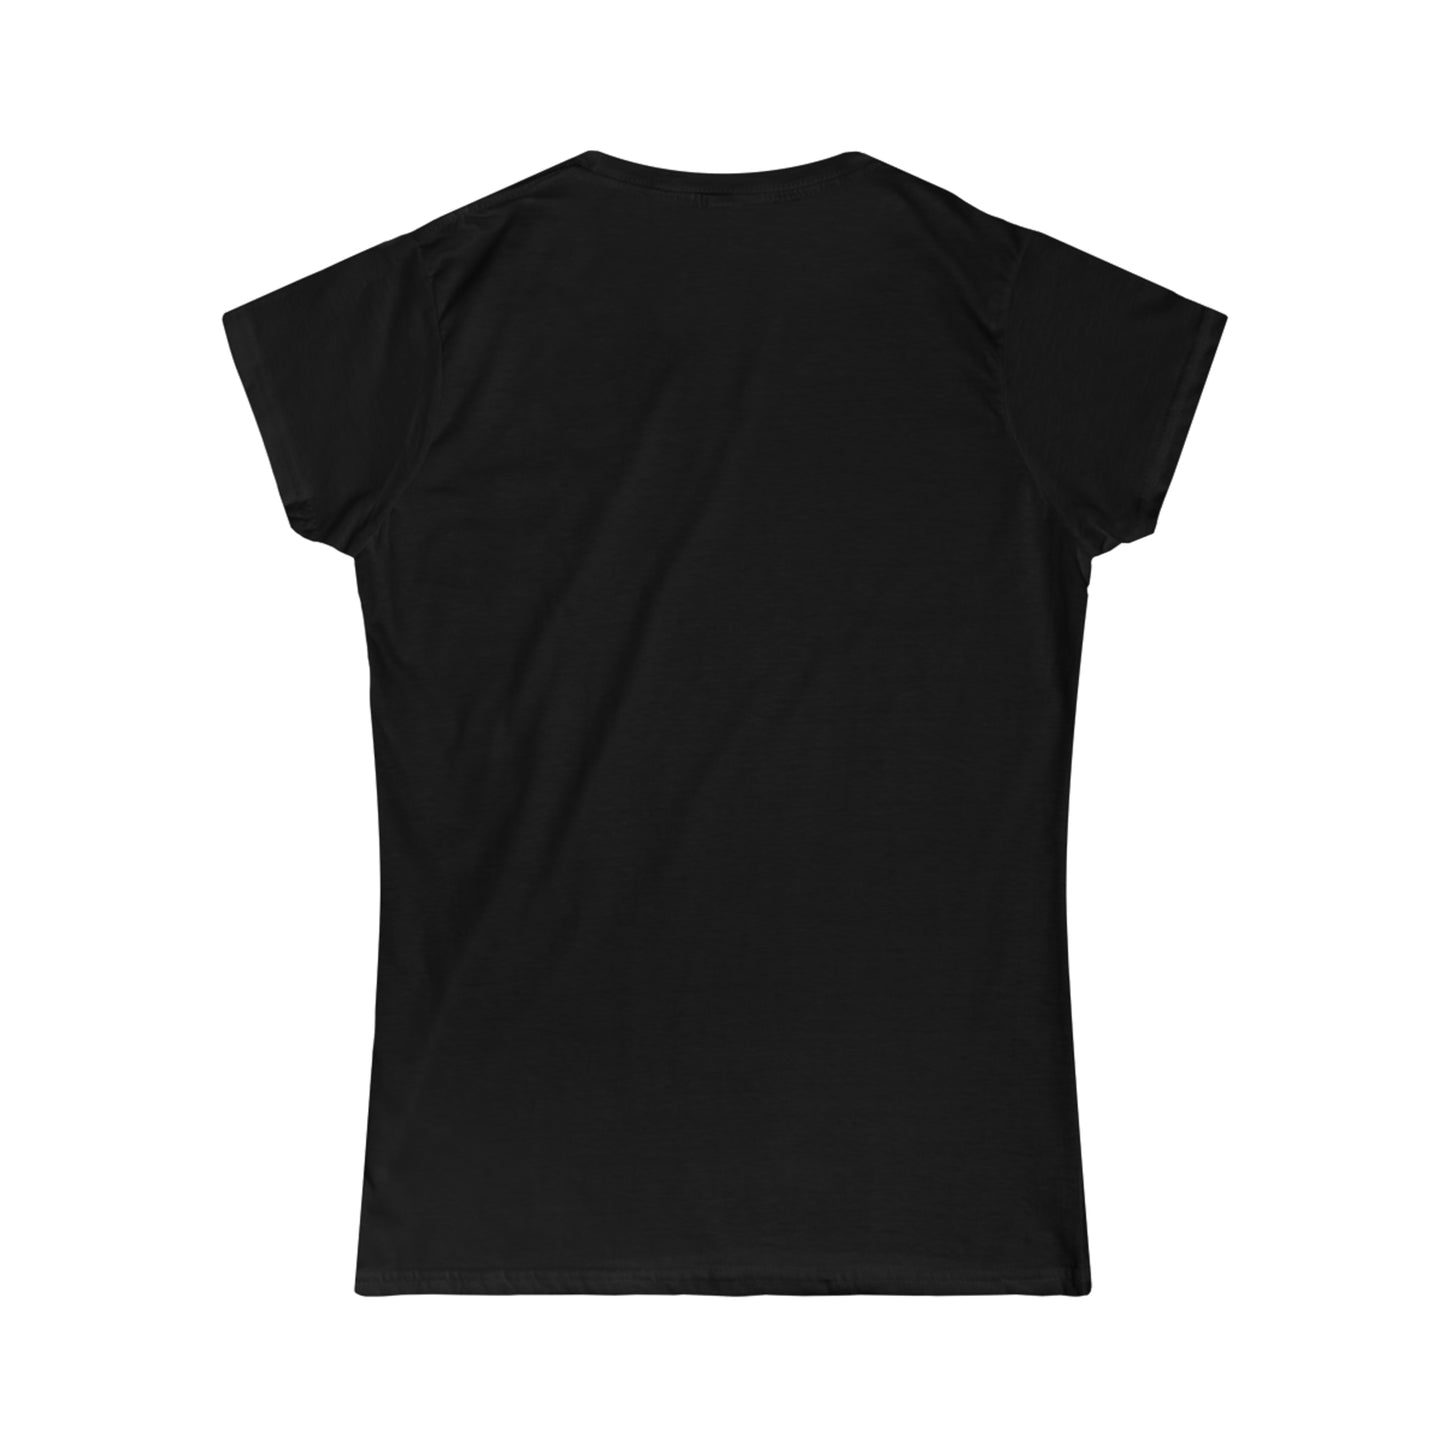 This is the Way Women's Softstyle Tee